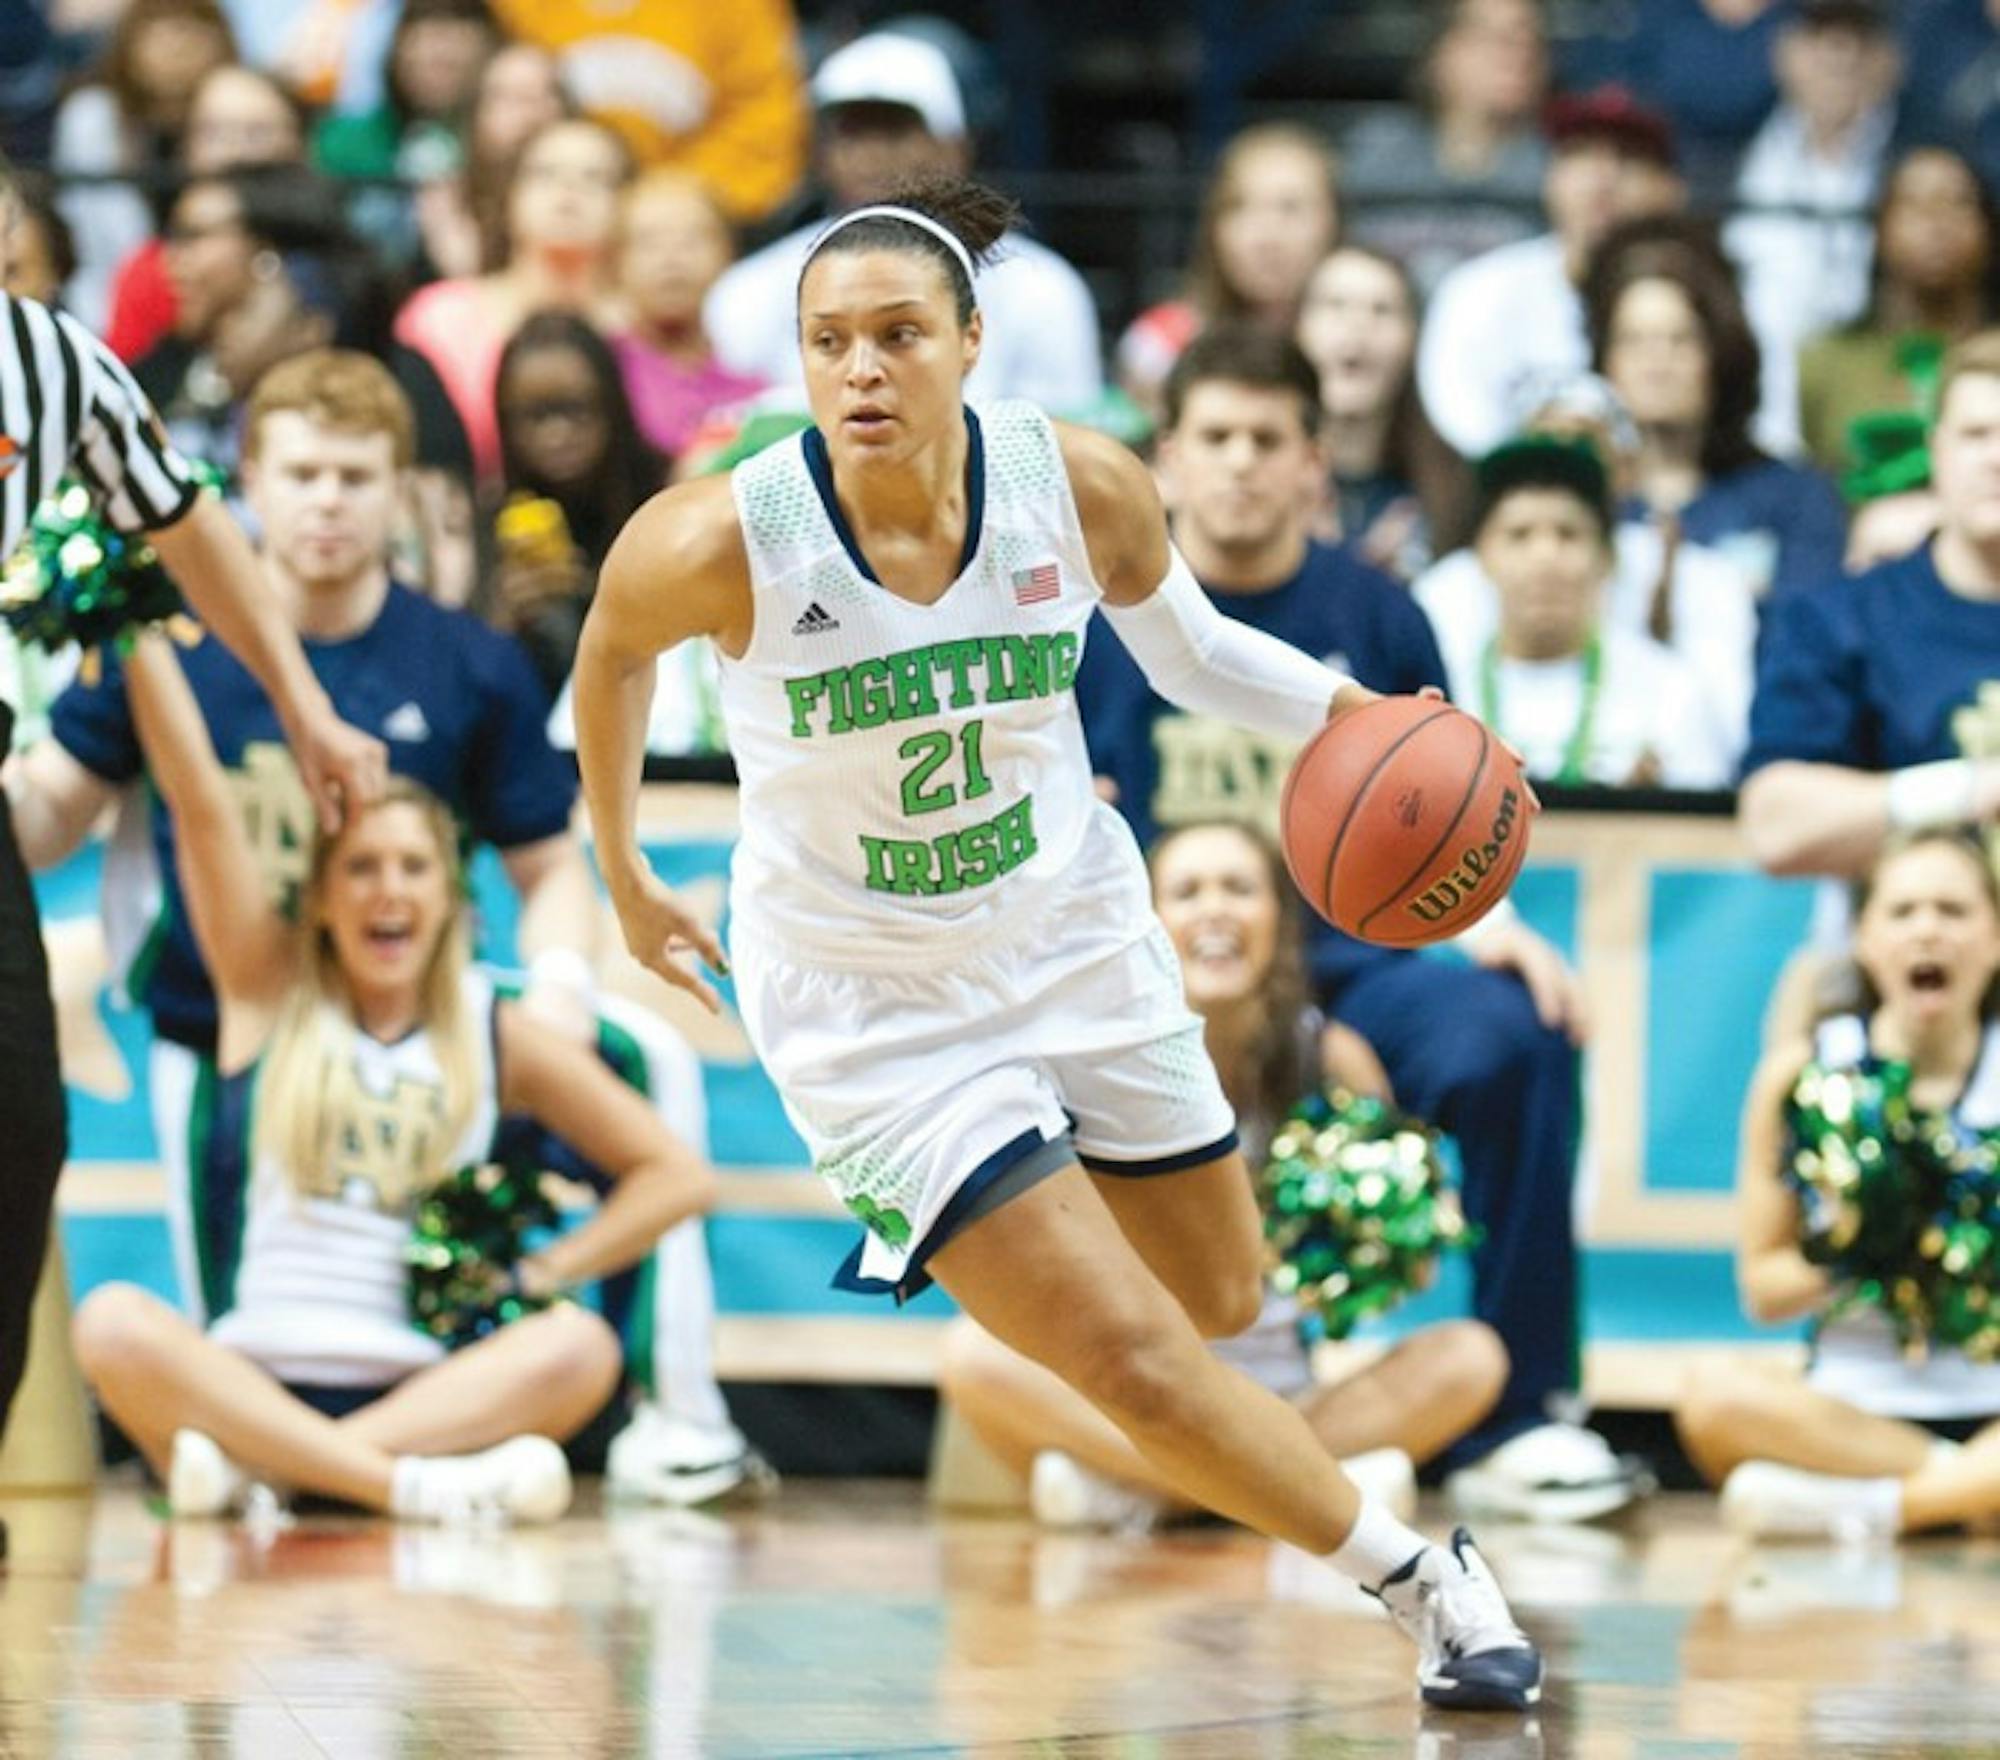 Irish senior guard Kayla McBride brings the ball up the court during Notre Dame’s 87-61 victory over Maryland on Sunday. McBride led all scorers with 28 points.